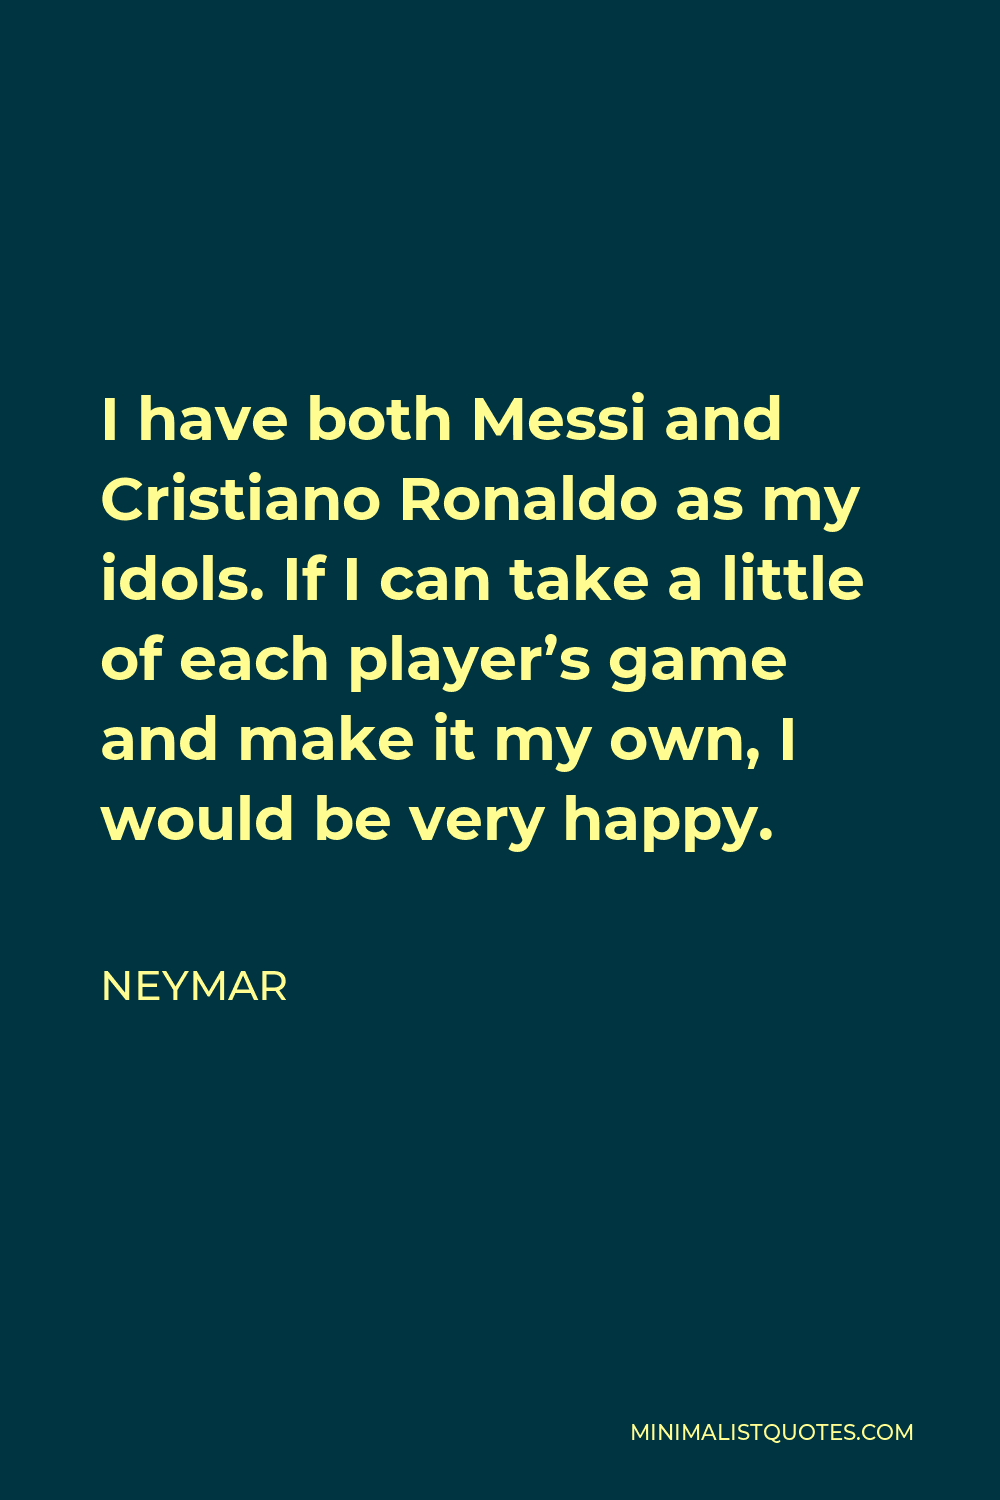 Neymar Quote - I have both Messi and Cristiano Ronaldo as my idols. If I can take a little of each player’s game and make it my own, I would be very happy.